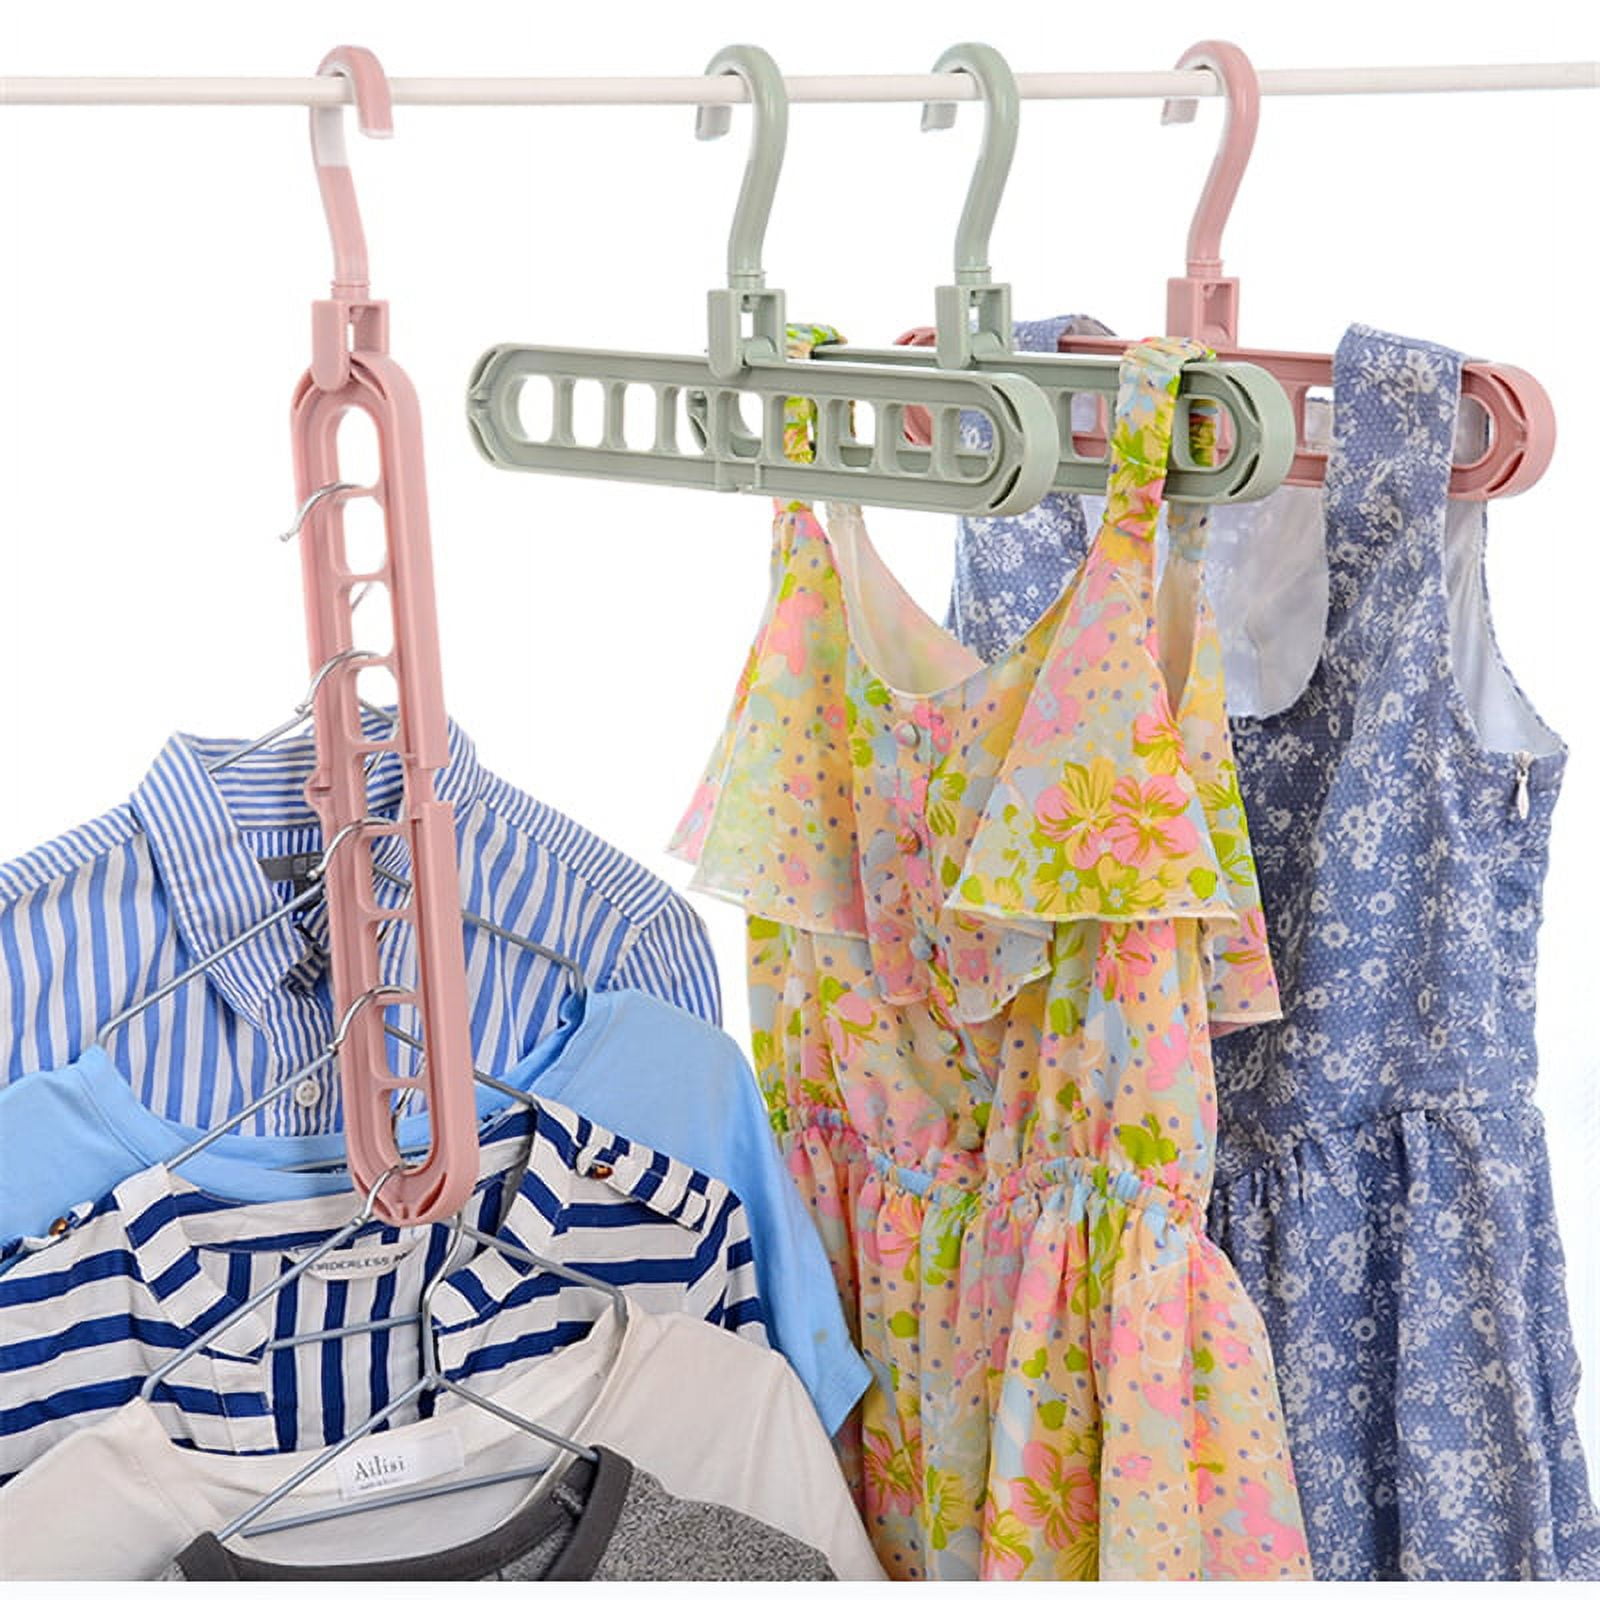 Adjustable 9 Hole Magic Clothes Hangers Space Saving Metal Clothes